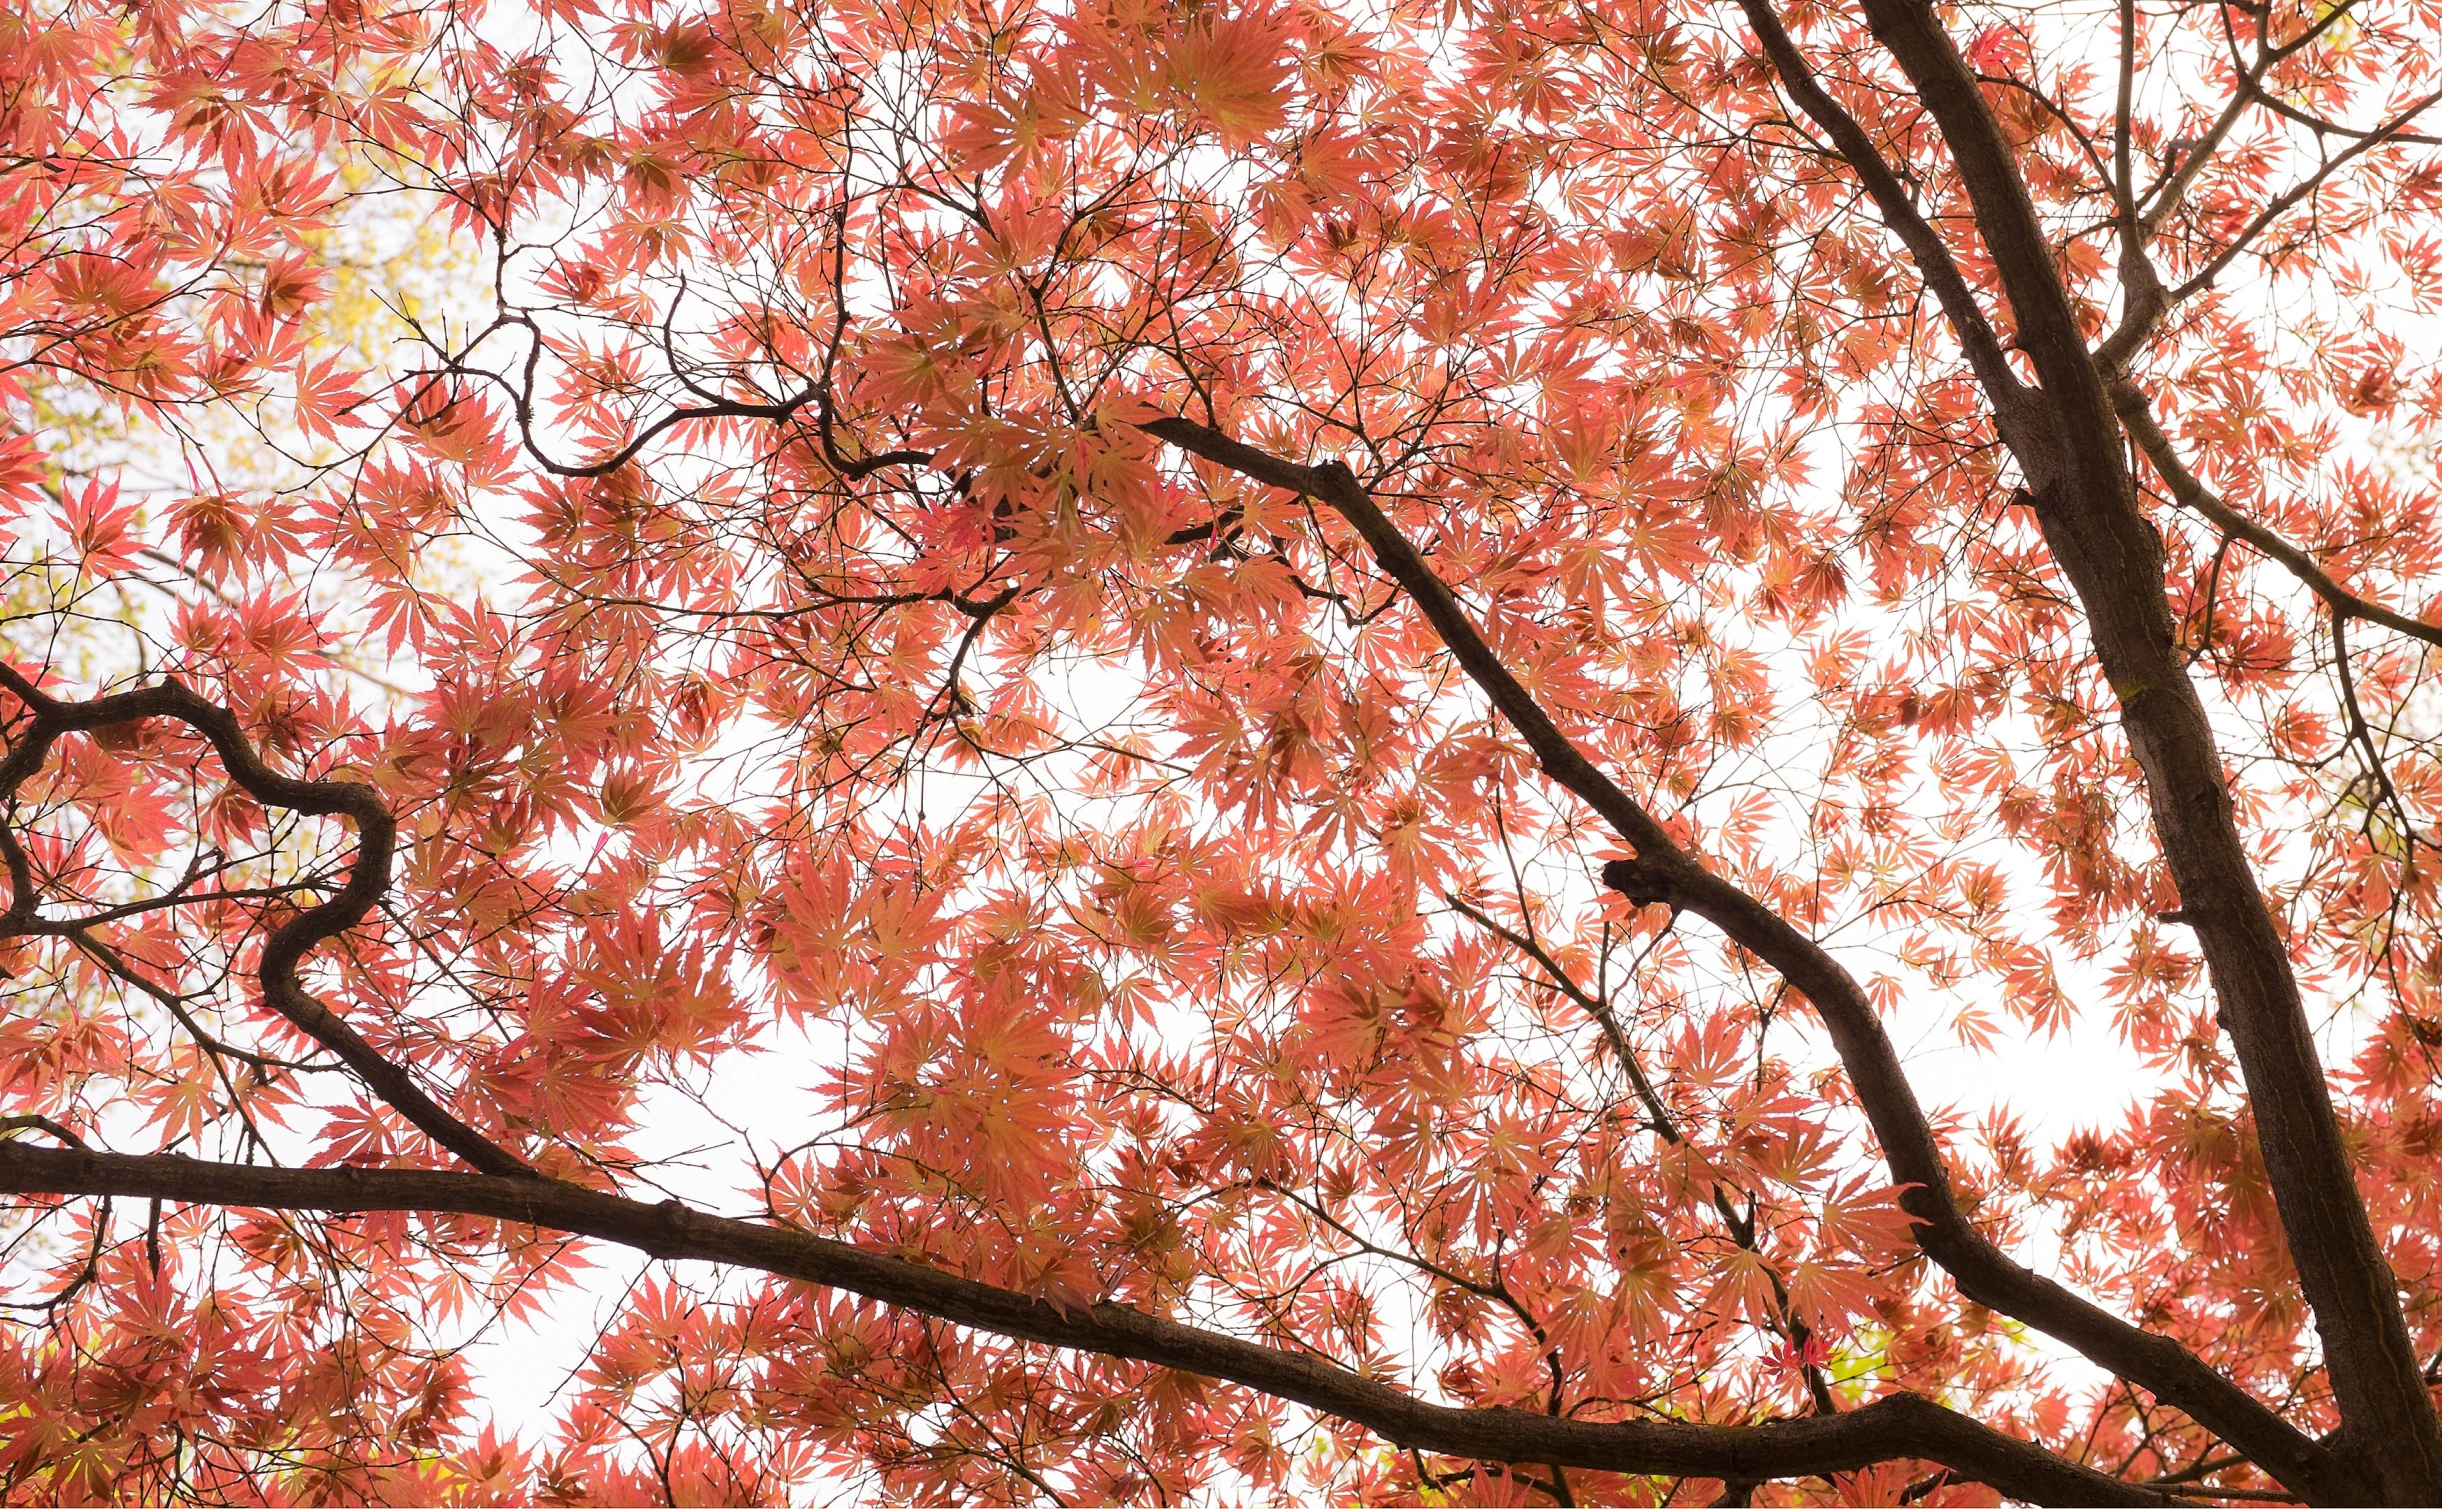 red leaves on a tree are seen in the foreground